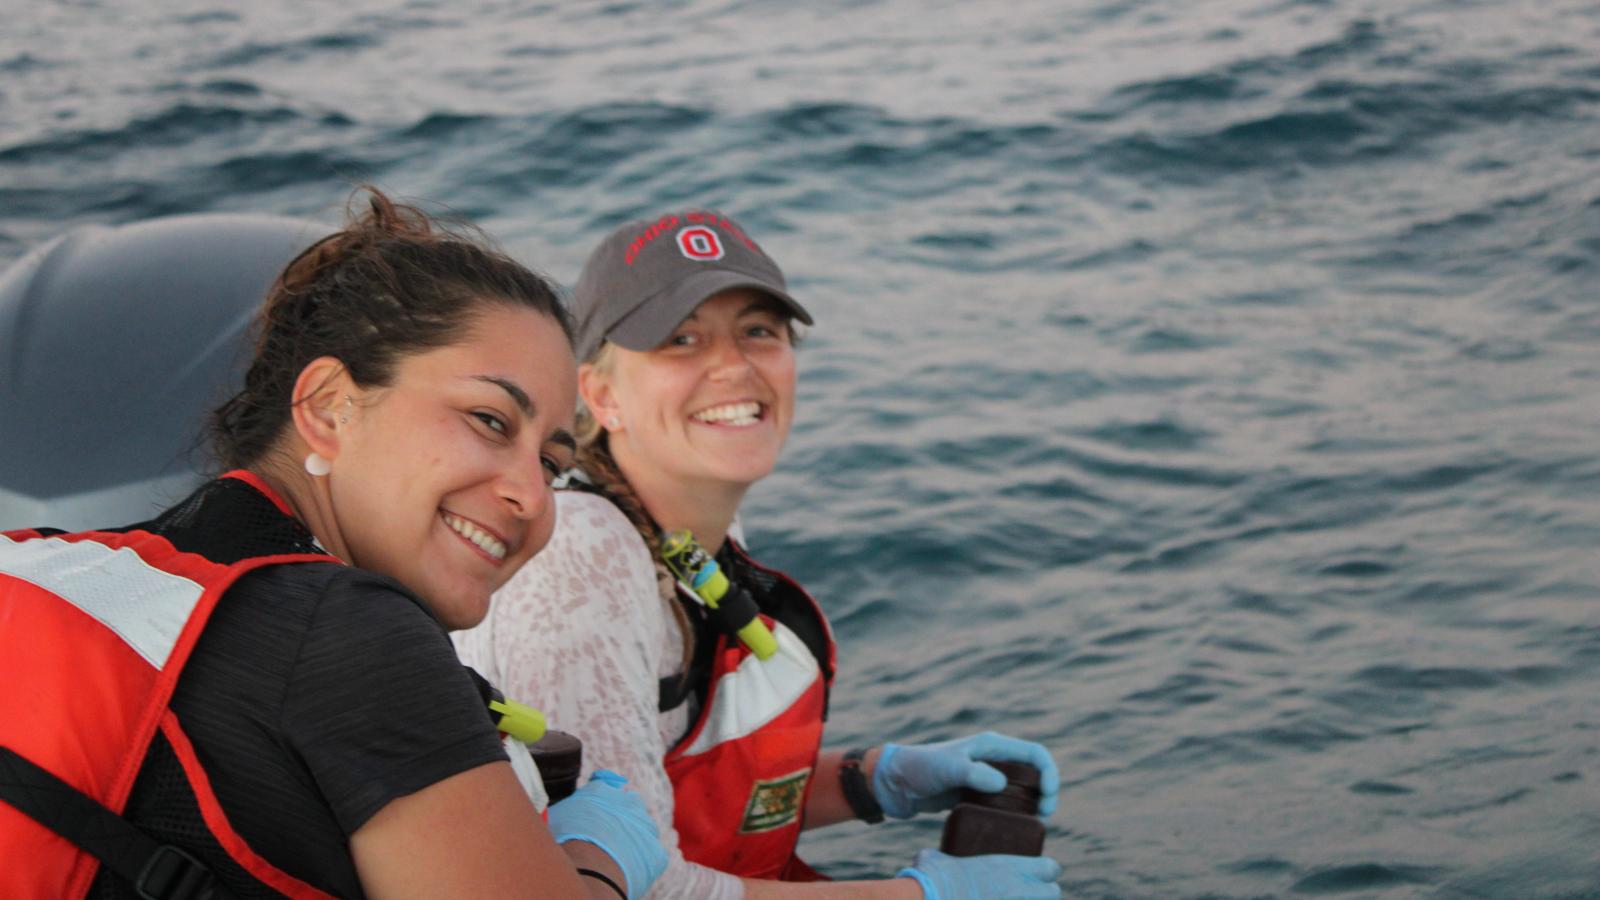 Postdoc Dr. Leila Chapron and graduate student Ann Marie Hulver collecting water samples